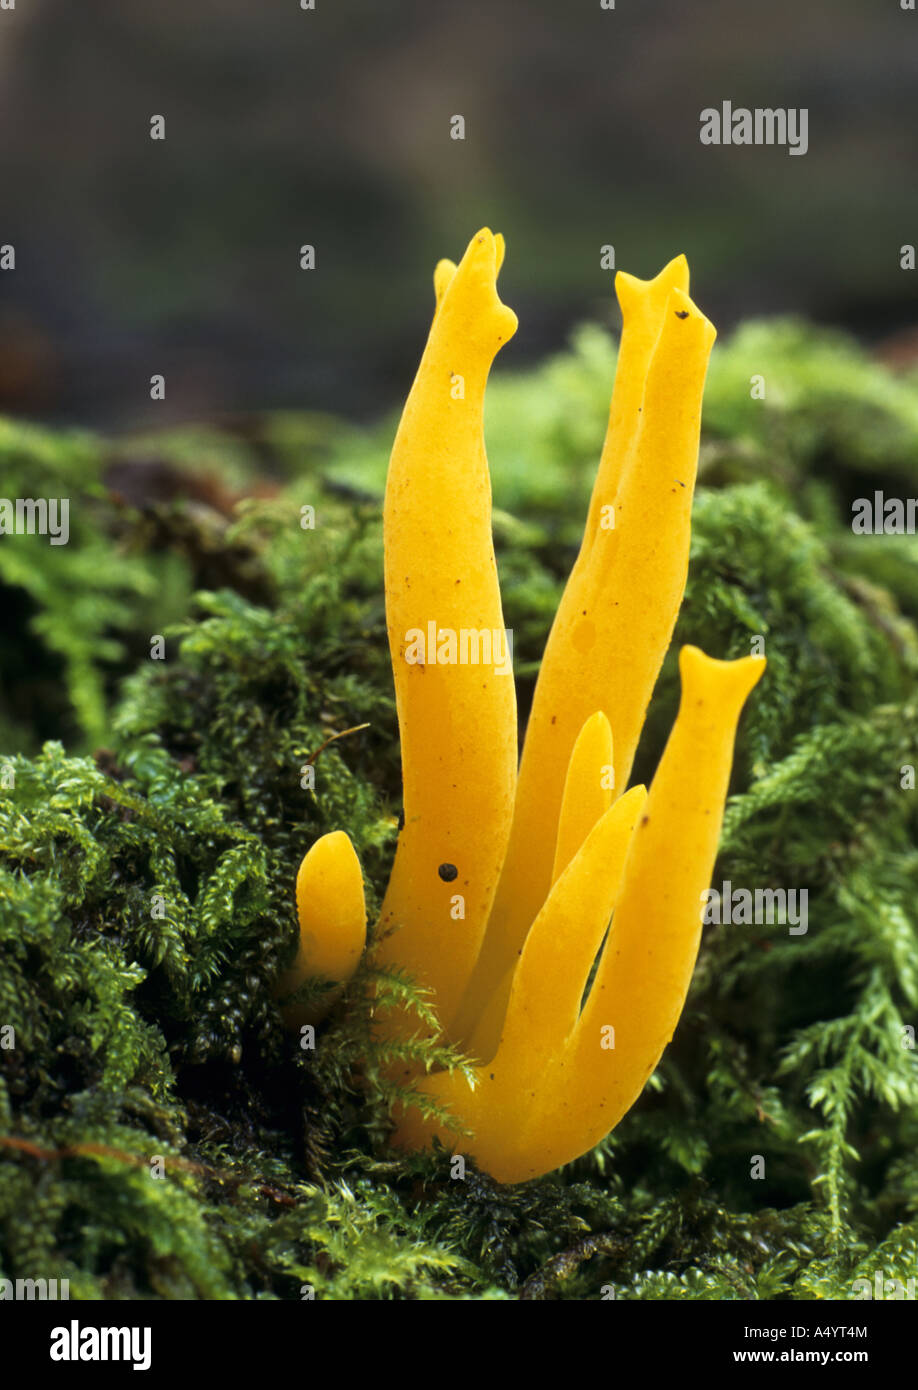 jelly antler fungus Cantharellus cibarius Cabilla woods cornwall Stock Photo